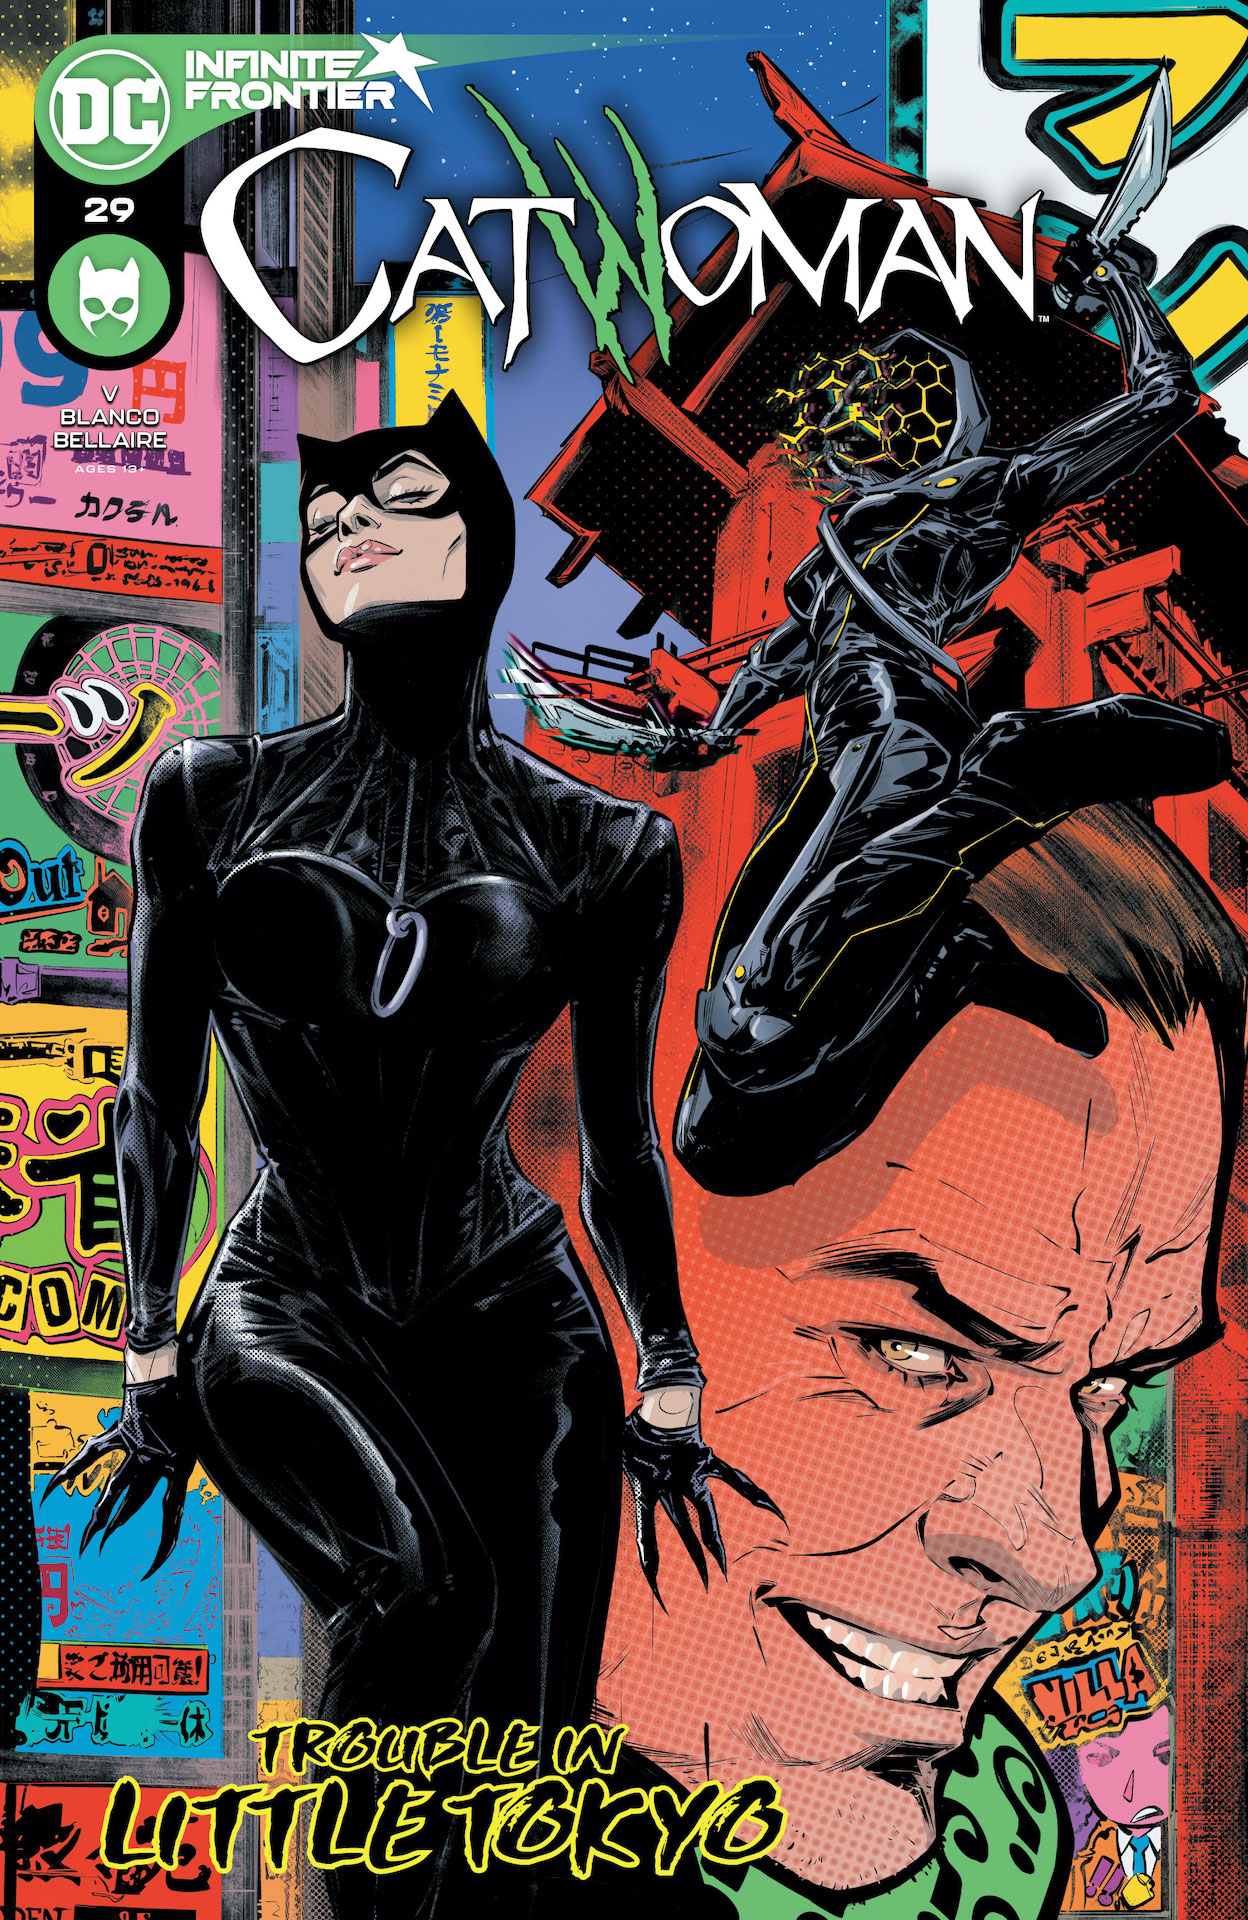 DC Preview: Catwoman #29